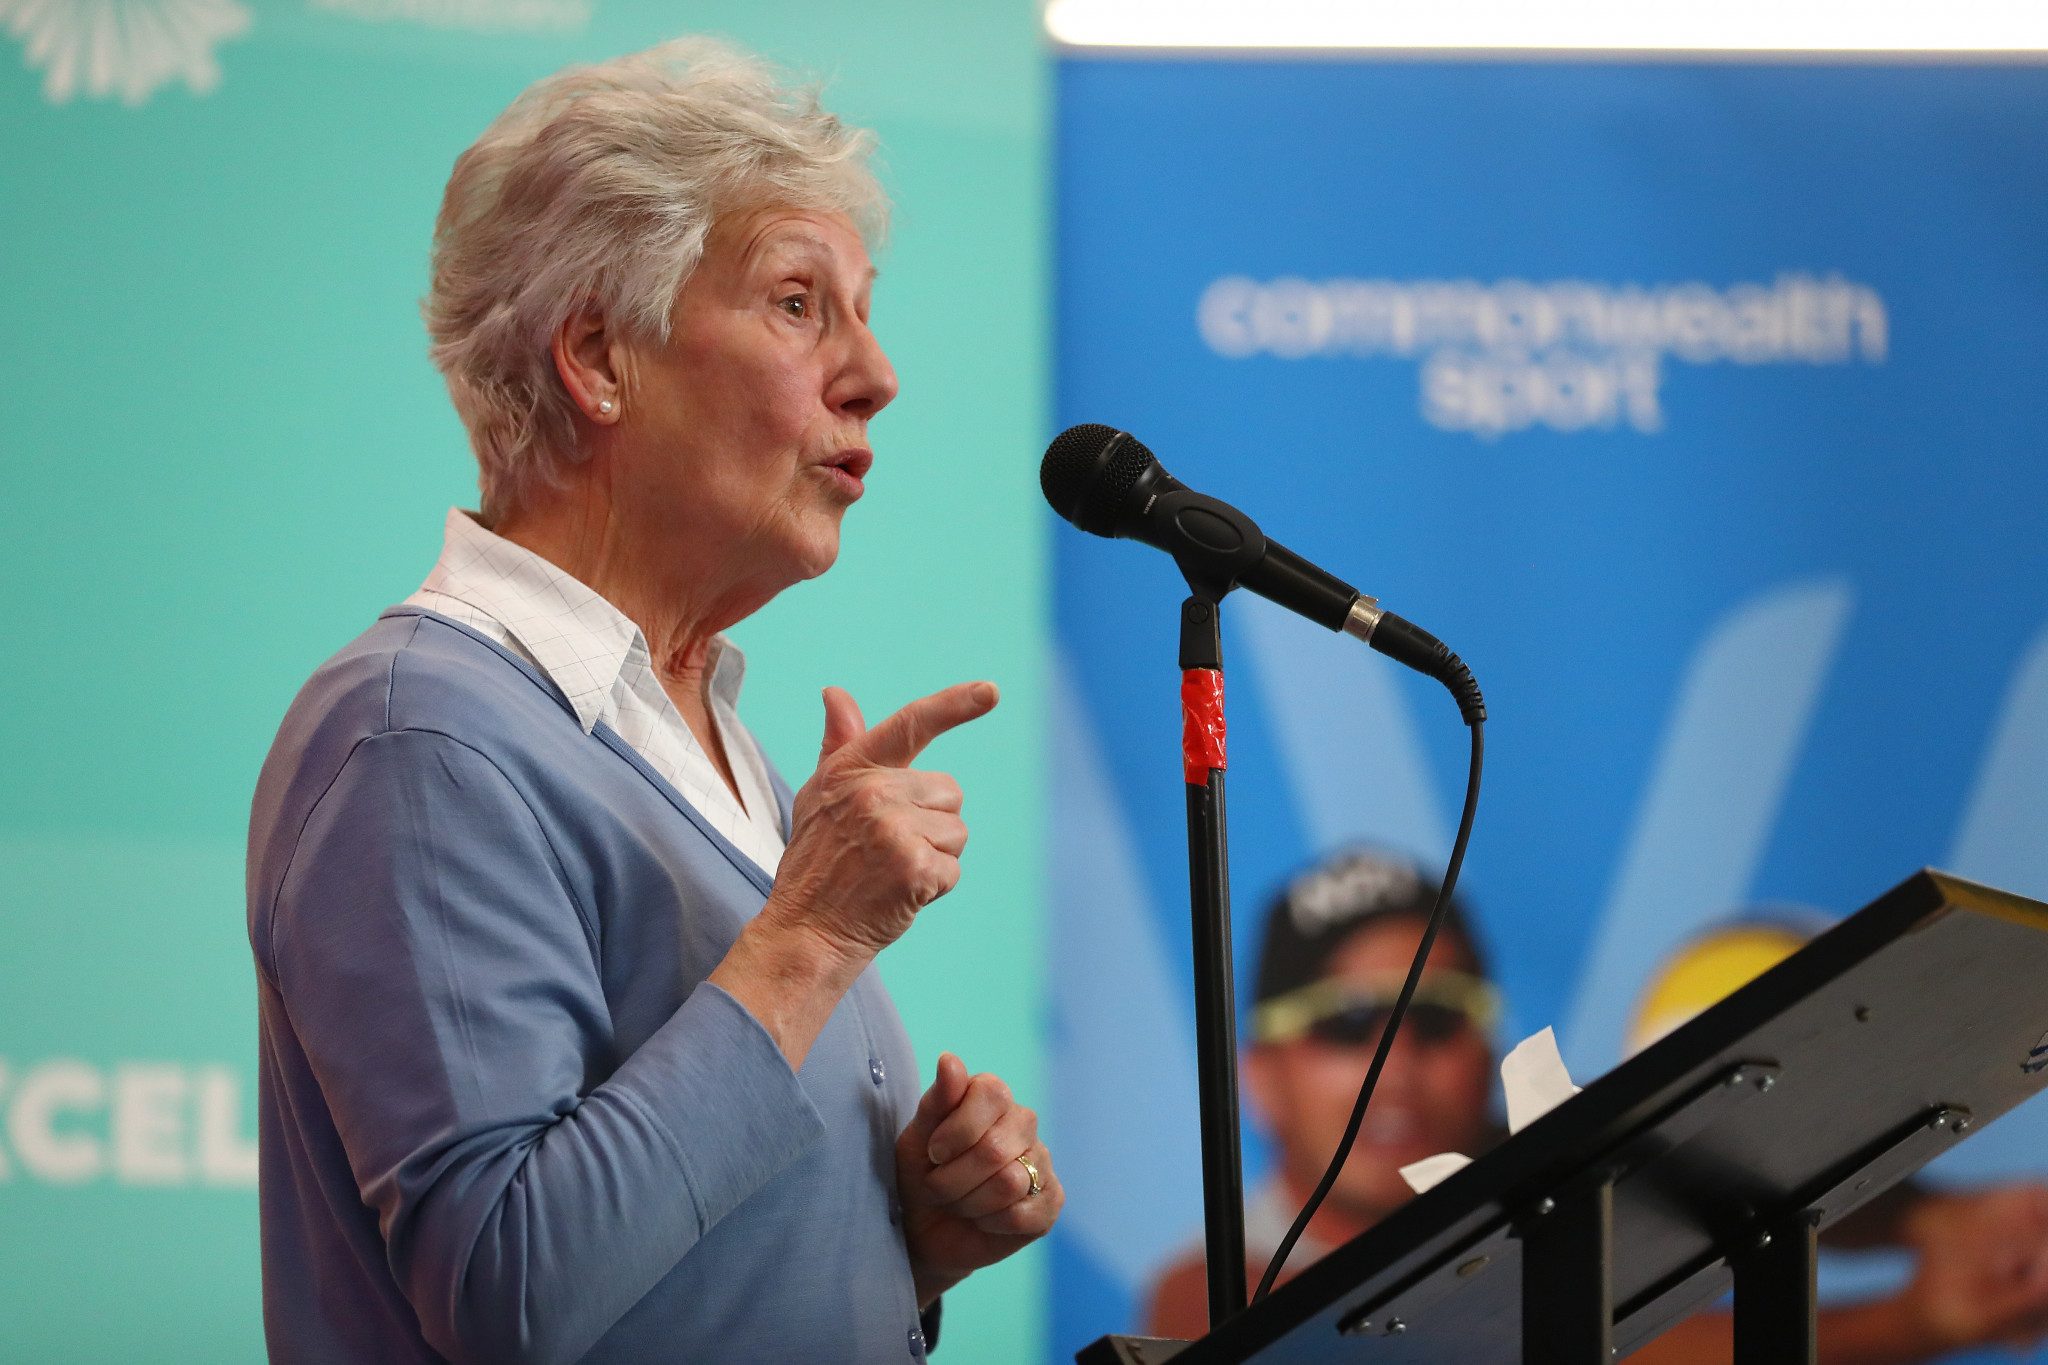 Commonwealth Games Federation President Dame Louise Martin has said next year's Commonwealth Youth Games in Trinidad & Tobago will be 